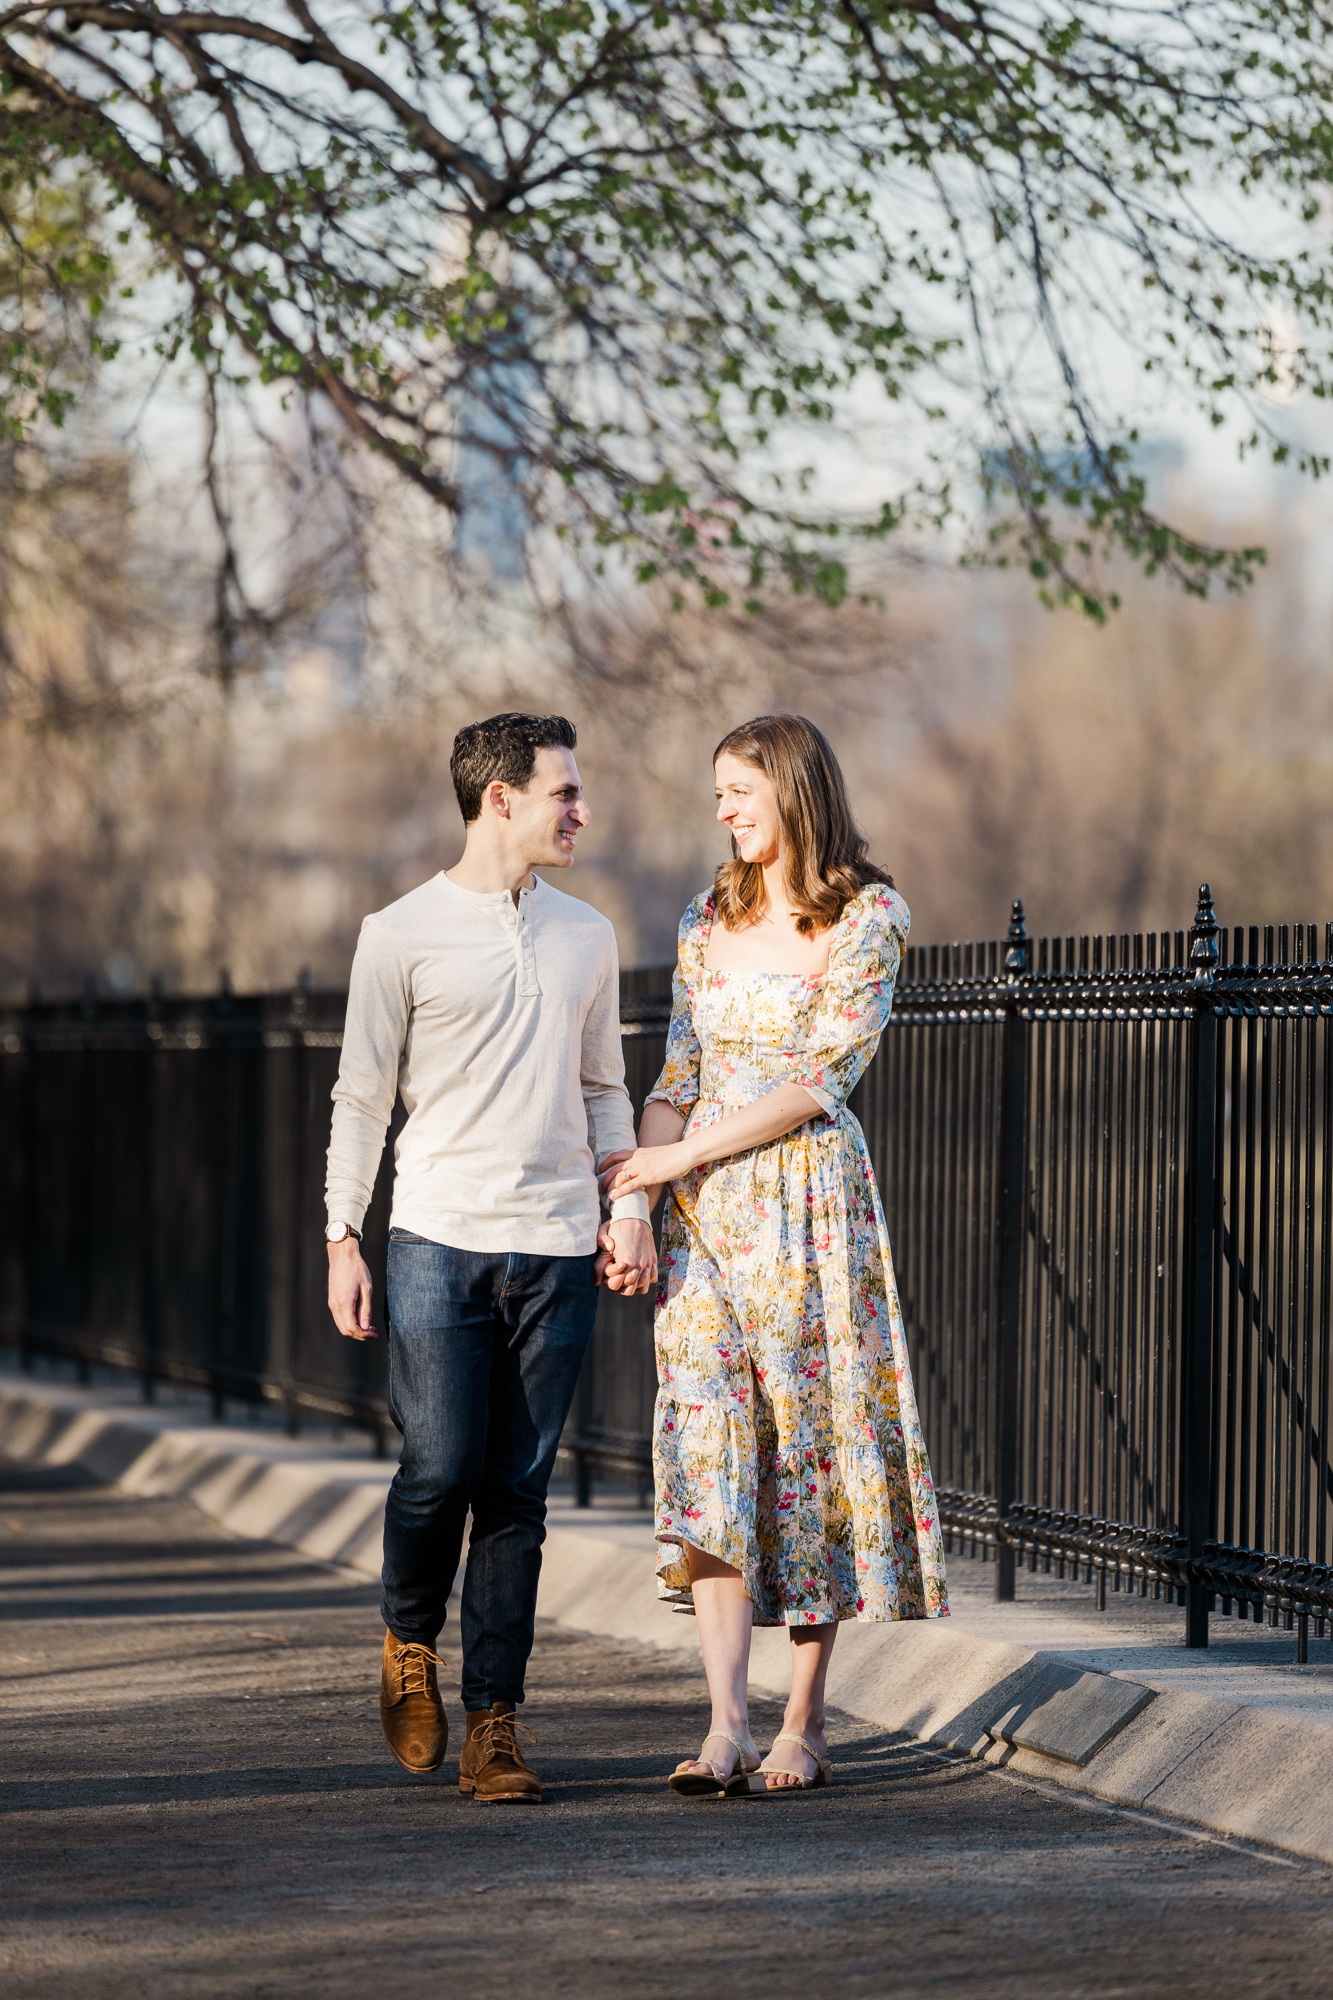 Perfect Upper East Side Engagement Photo Shoot